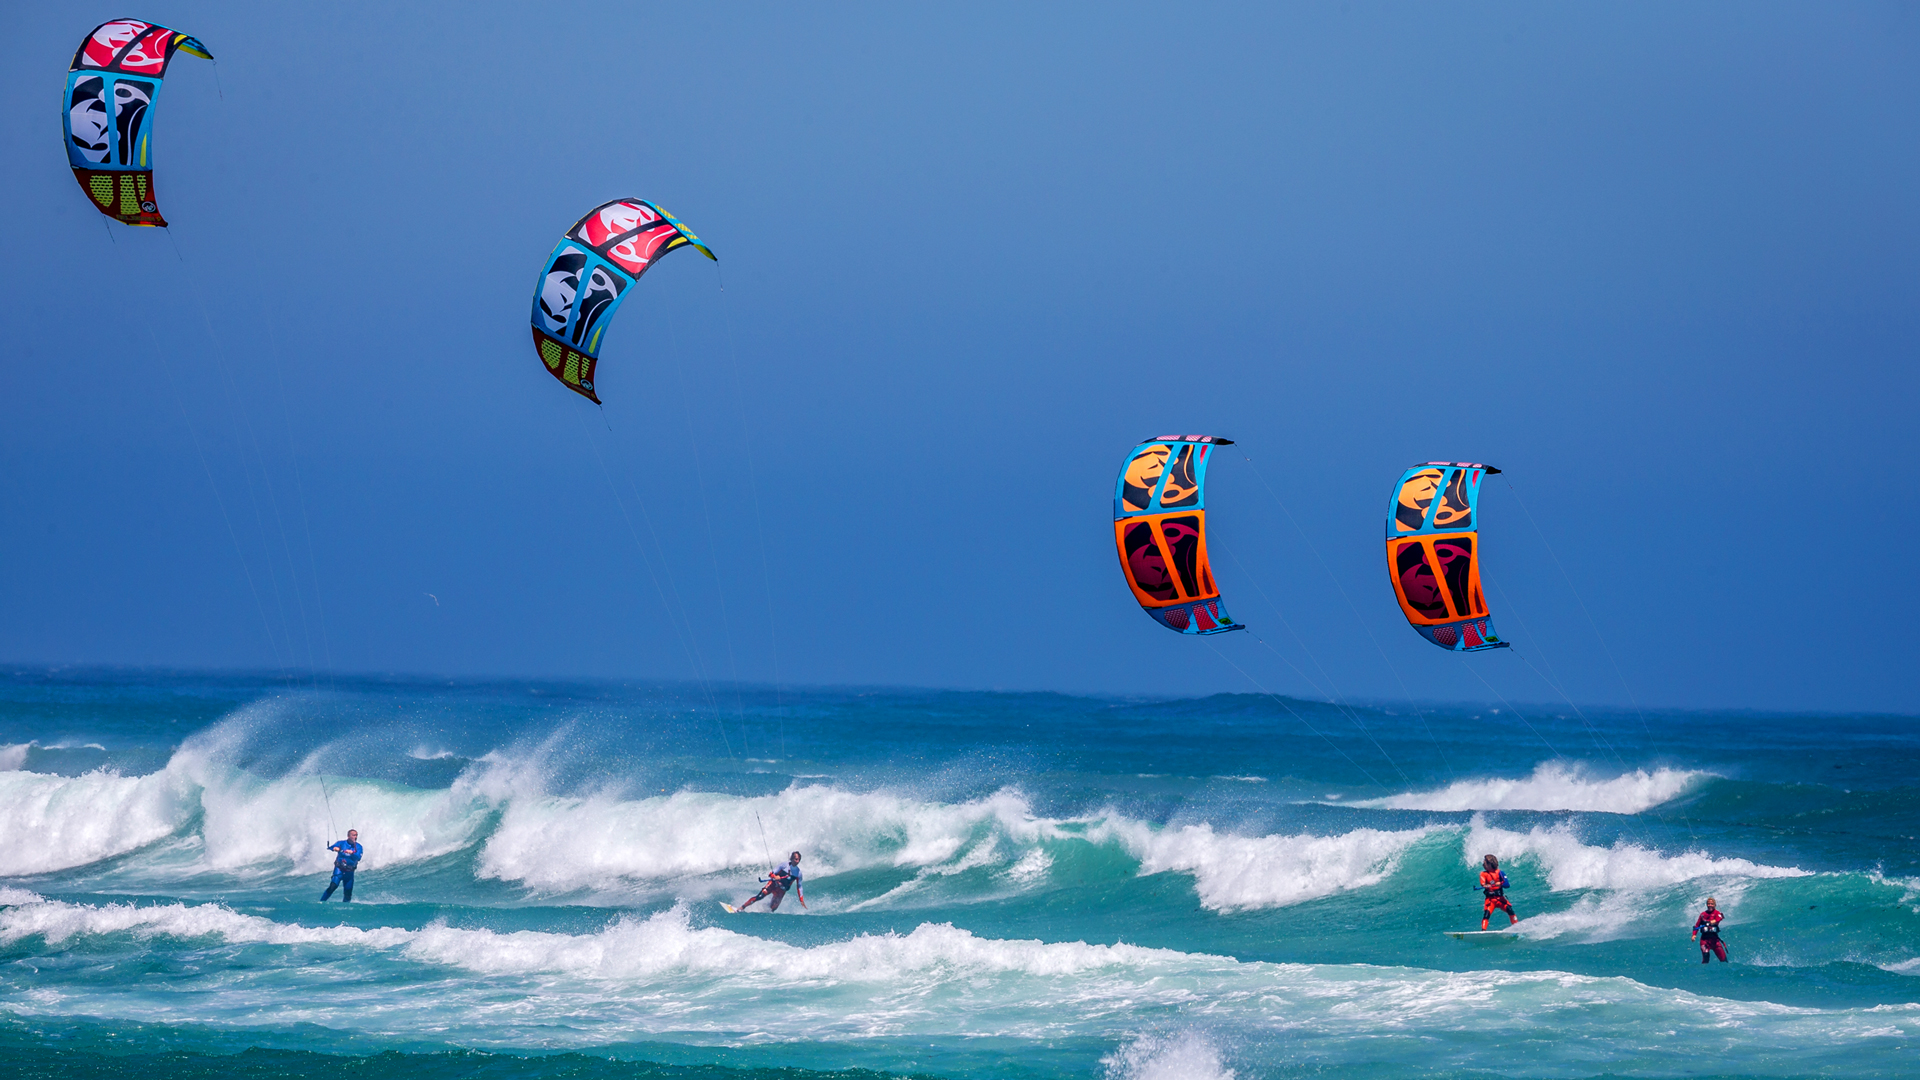 kitesurf wallpaper image - RRD squad taking over this wave on 2015 Religion kites - RRD Kiteboarding - in resolution: High Definition - HD 16:9 1920 X 1080